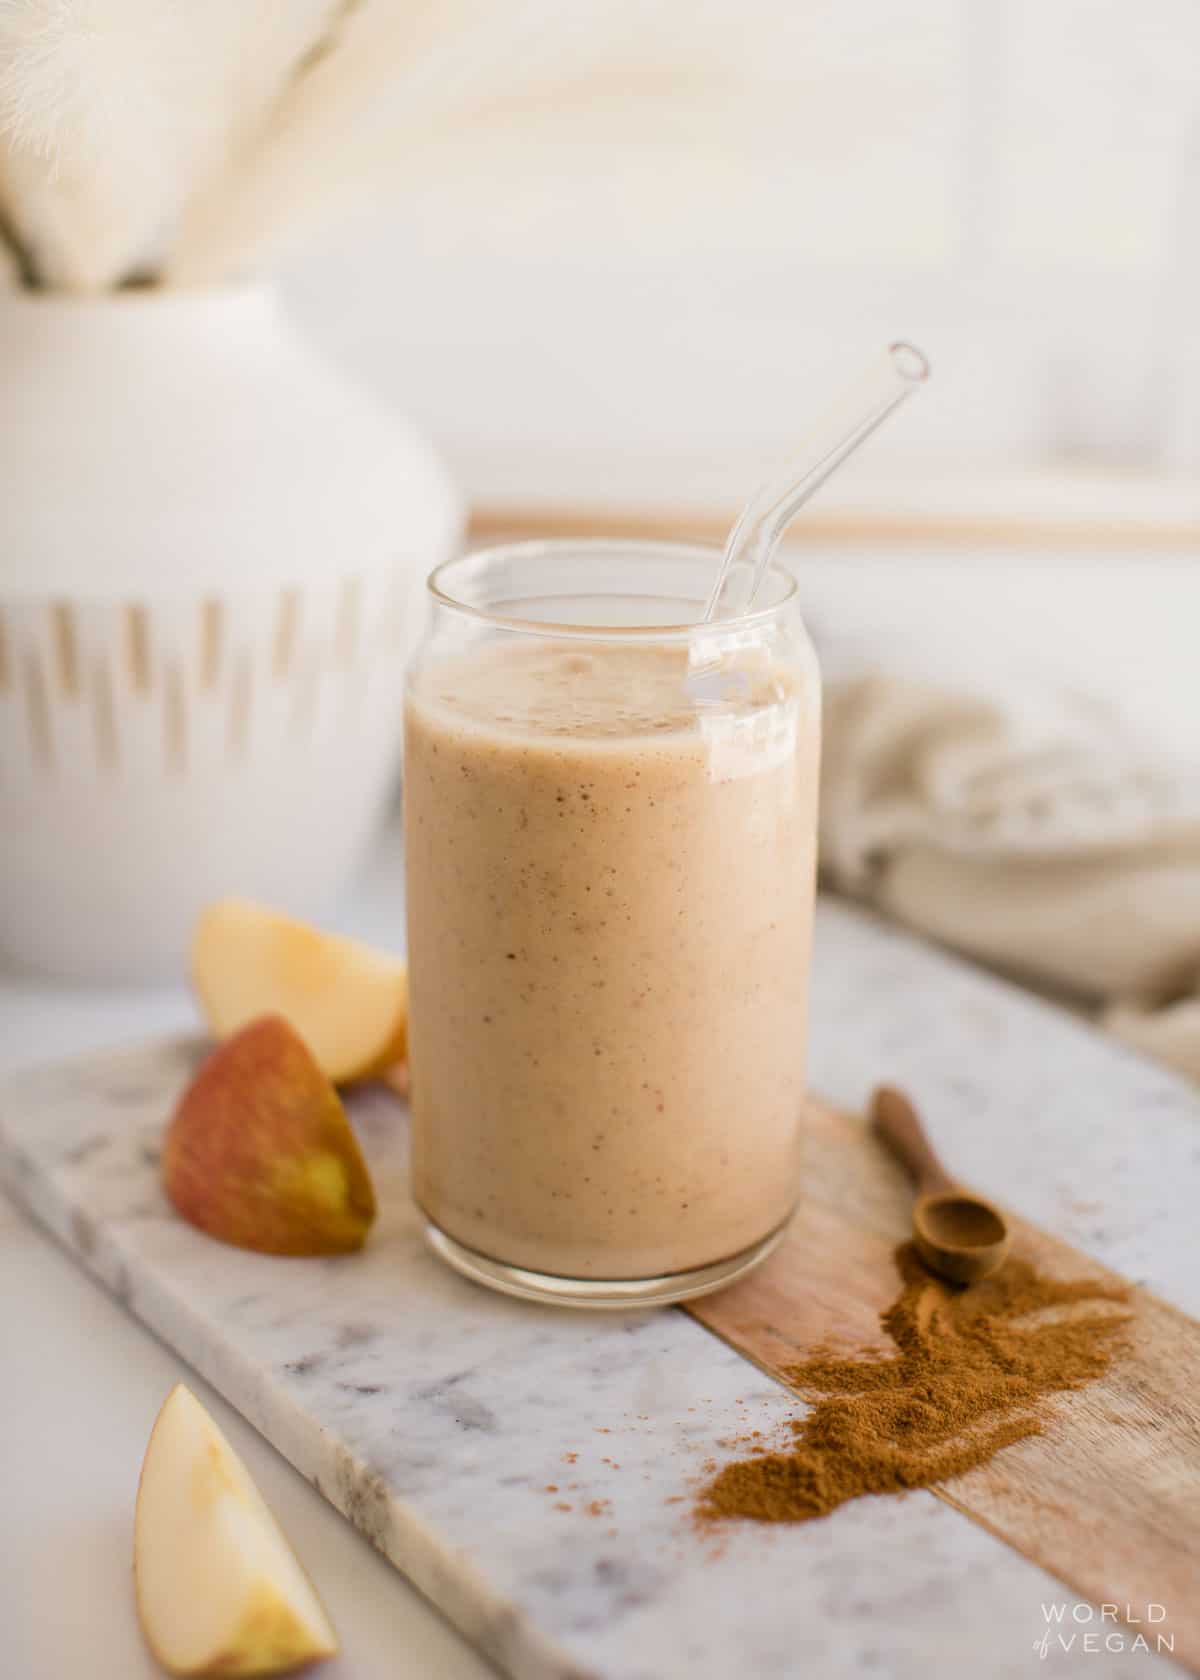 A glass filled with apple pie banana smoothie with sliced apples and ground cinnamon next to the glass.